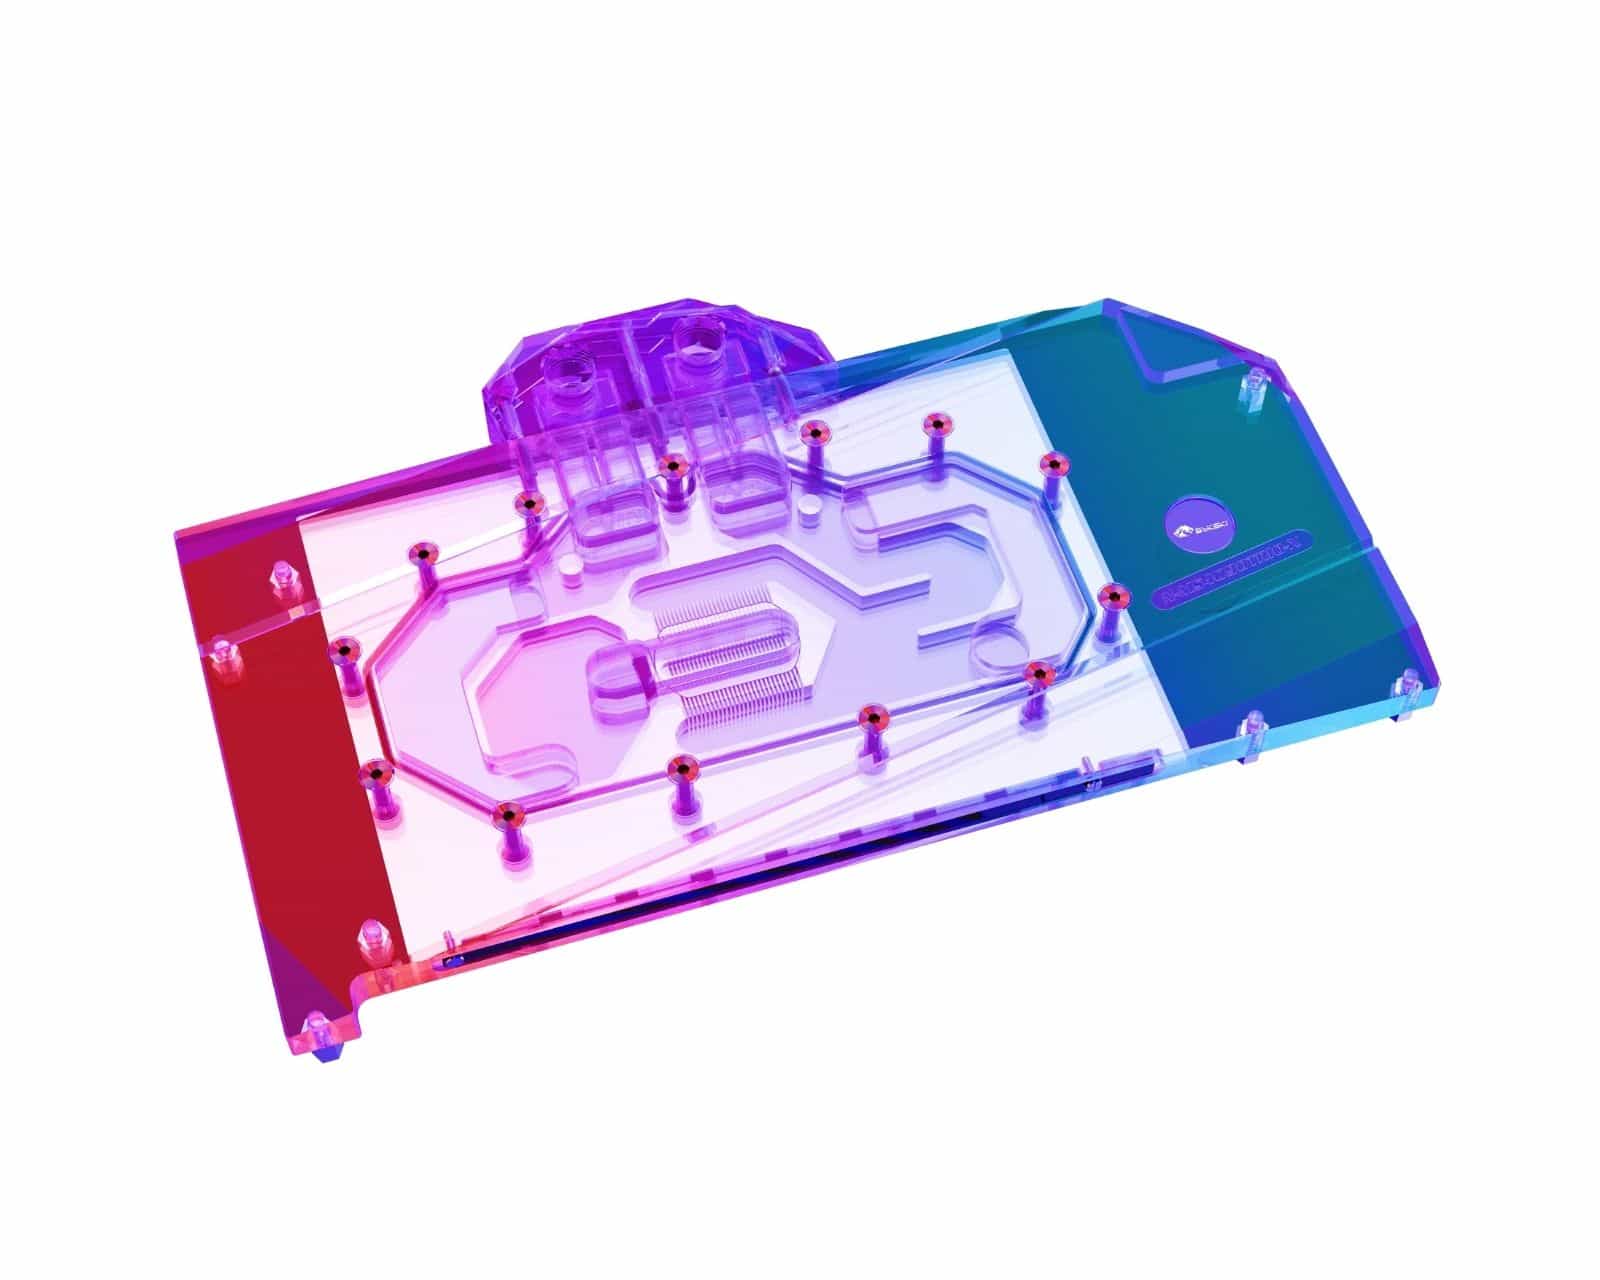 Bykski Full Coverage GPU Water Block and Backplate for MSI GeForce RTX 4090 Gaming X Trio (N-MS4090TRIO-X) - PrimoChill - KEEPING IT COOL